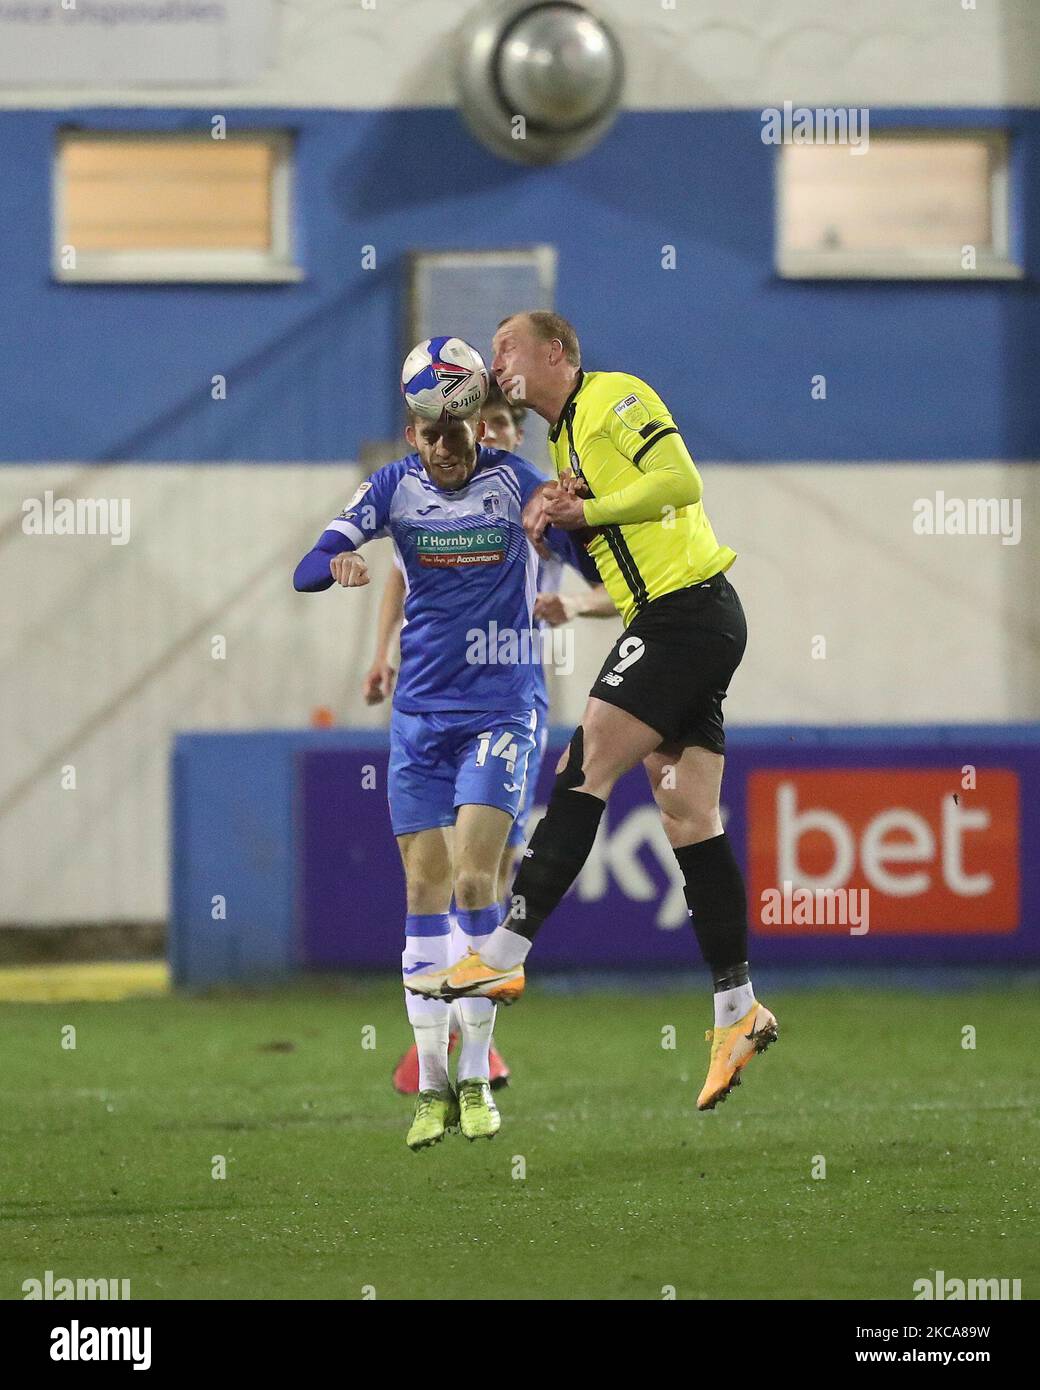 James Jones of Barrow contests a header with Mark Beck of Harrogate Town during the Sky Bet League 2 match between Barrow and Harrogate Town at the Holker Street, Barrow-in-Furness on Tuesday 2nd March 2021. (Photo by Mark Fletcher/MI News/NurPhoto) Stock Photo